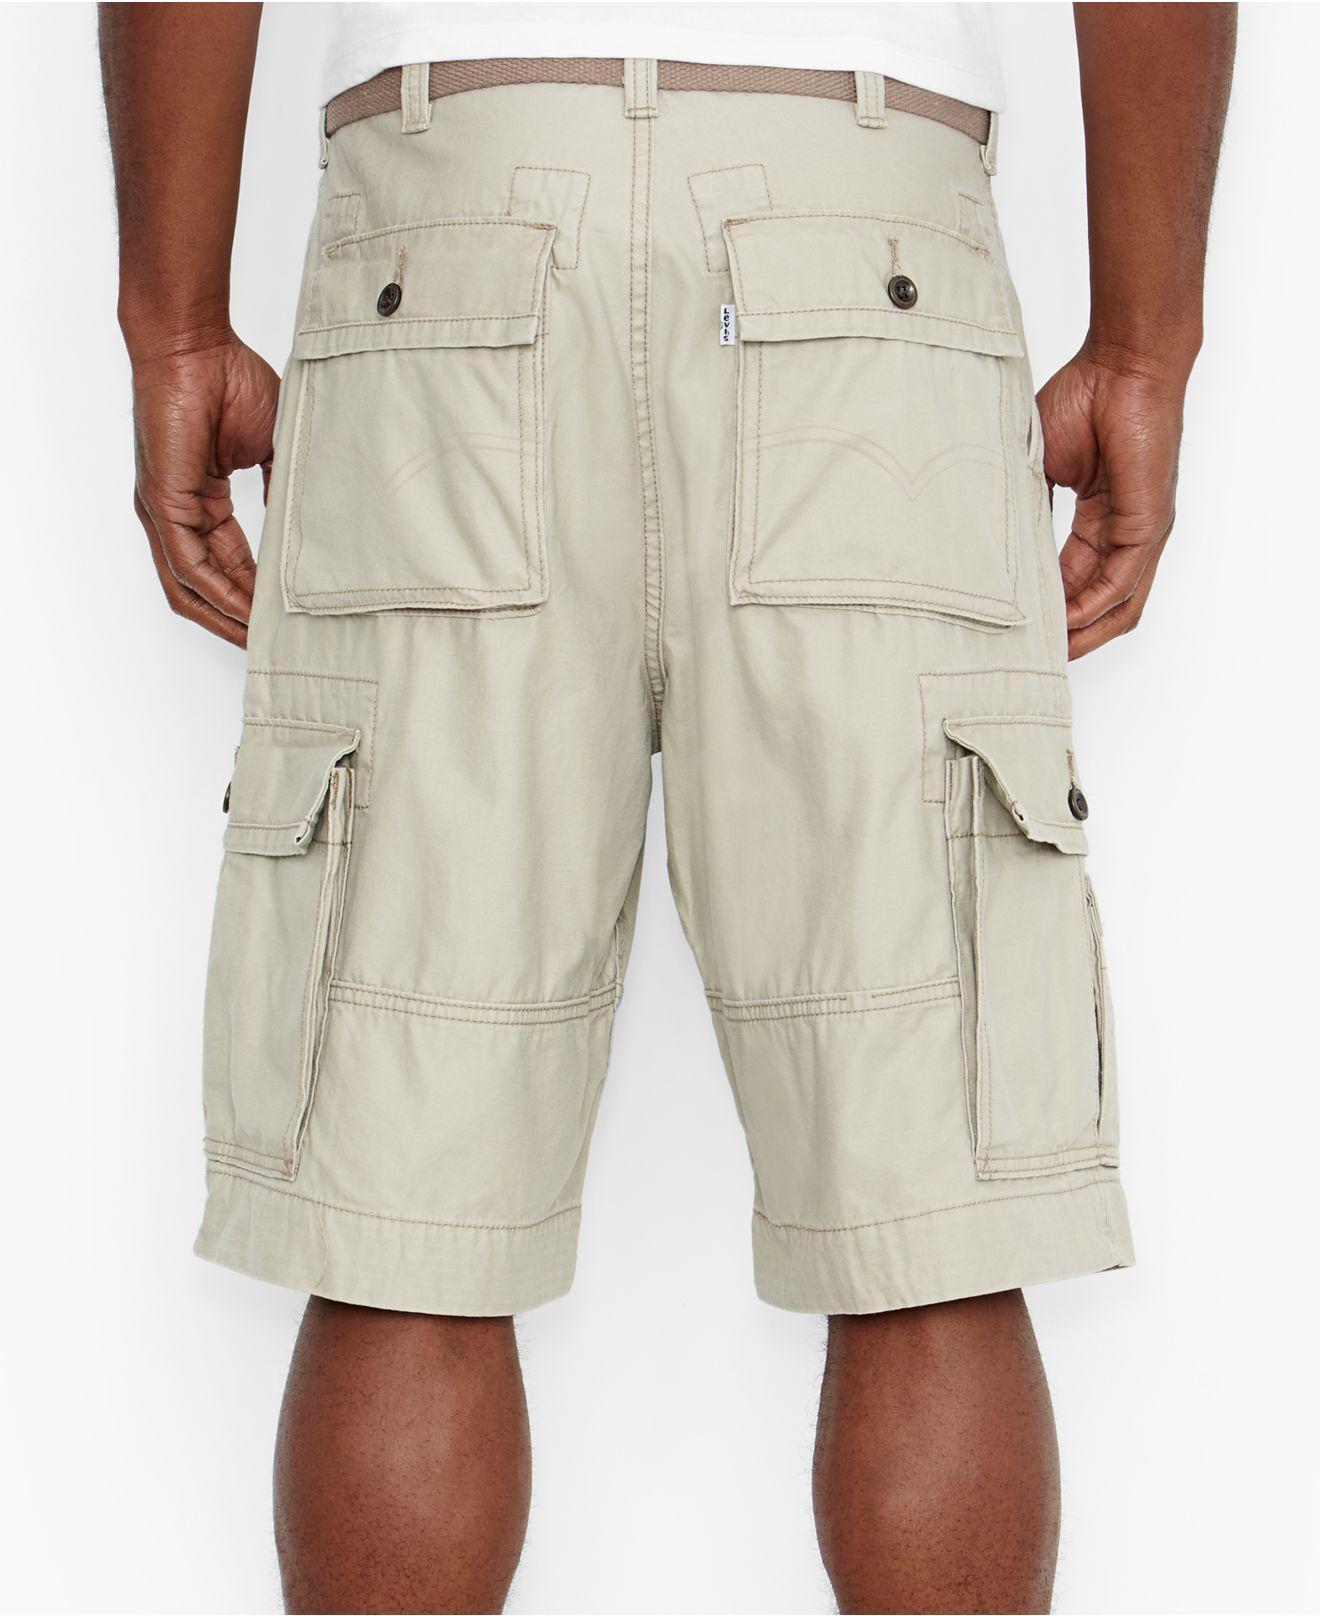 Lyst - Levi's Squad Cargo Shorts in Natural for Men